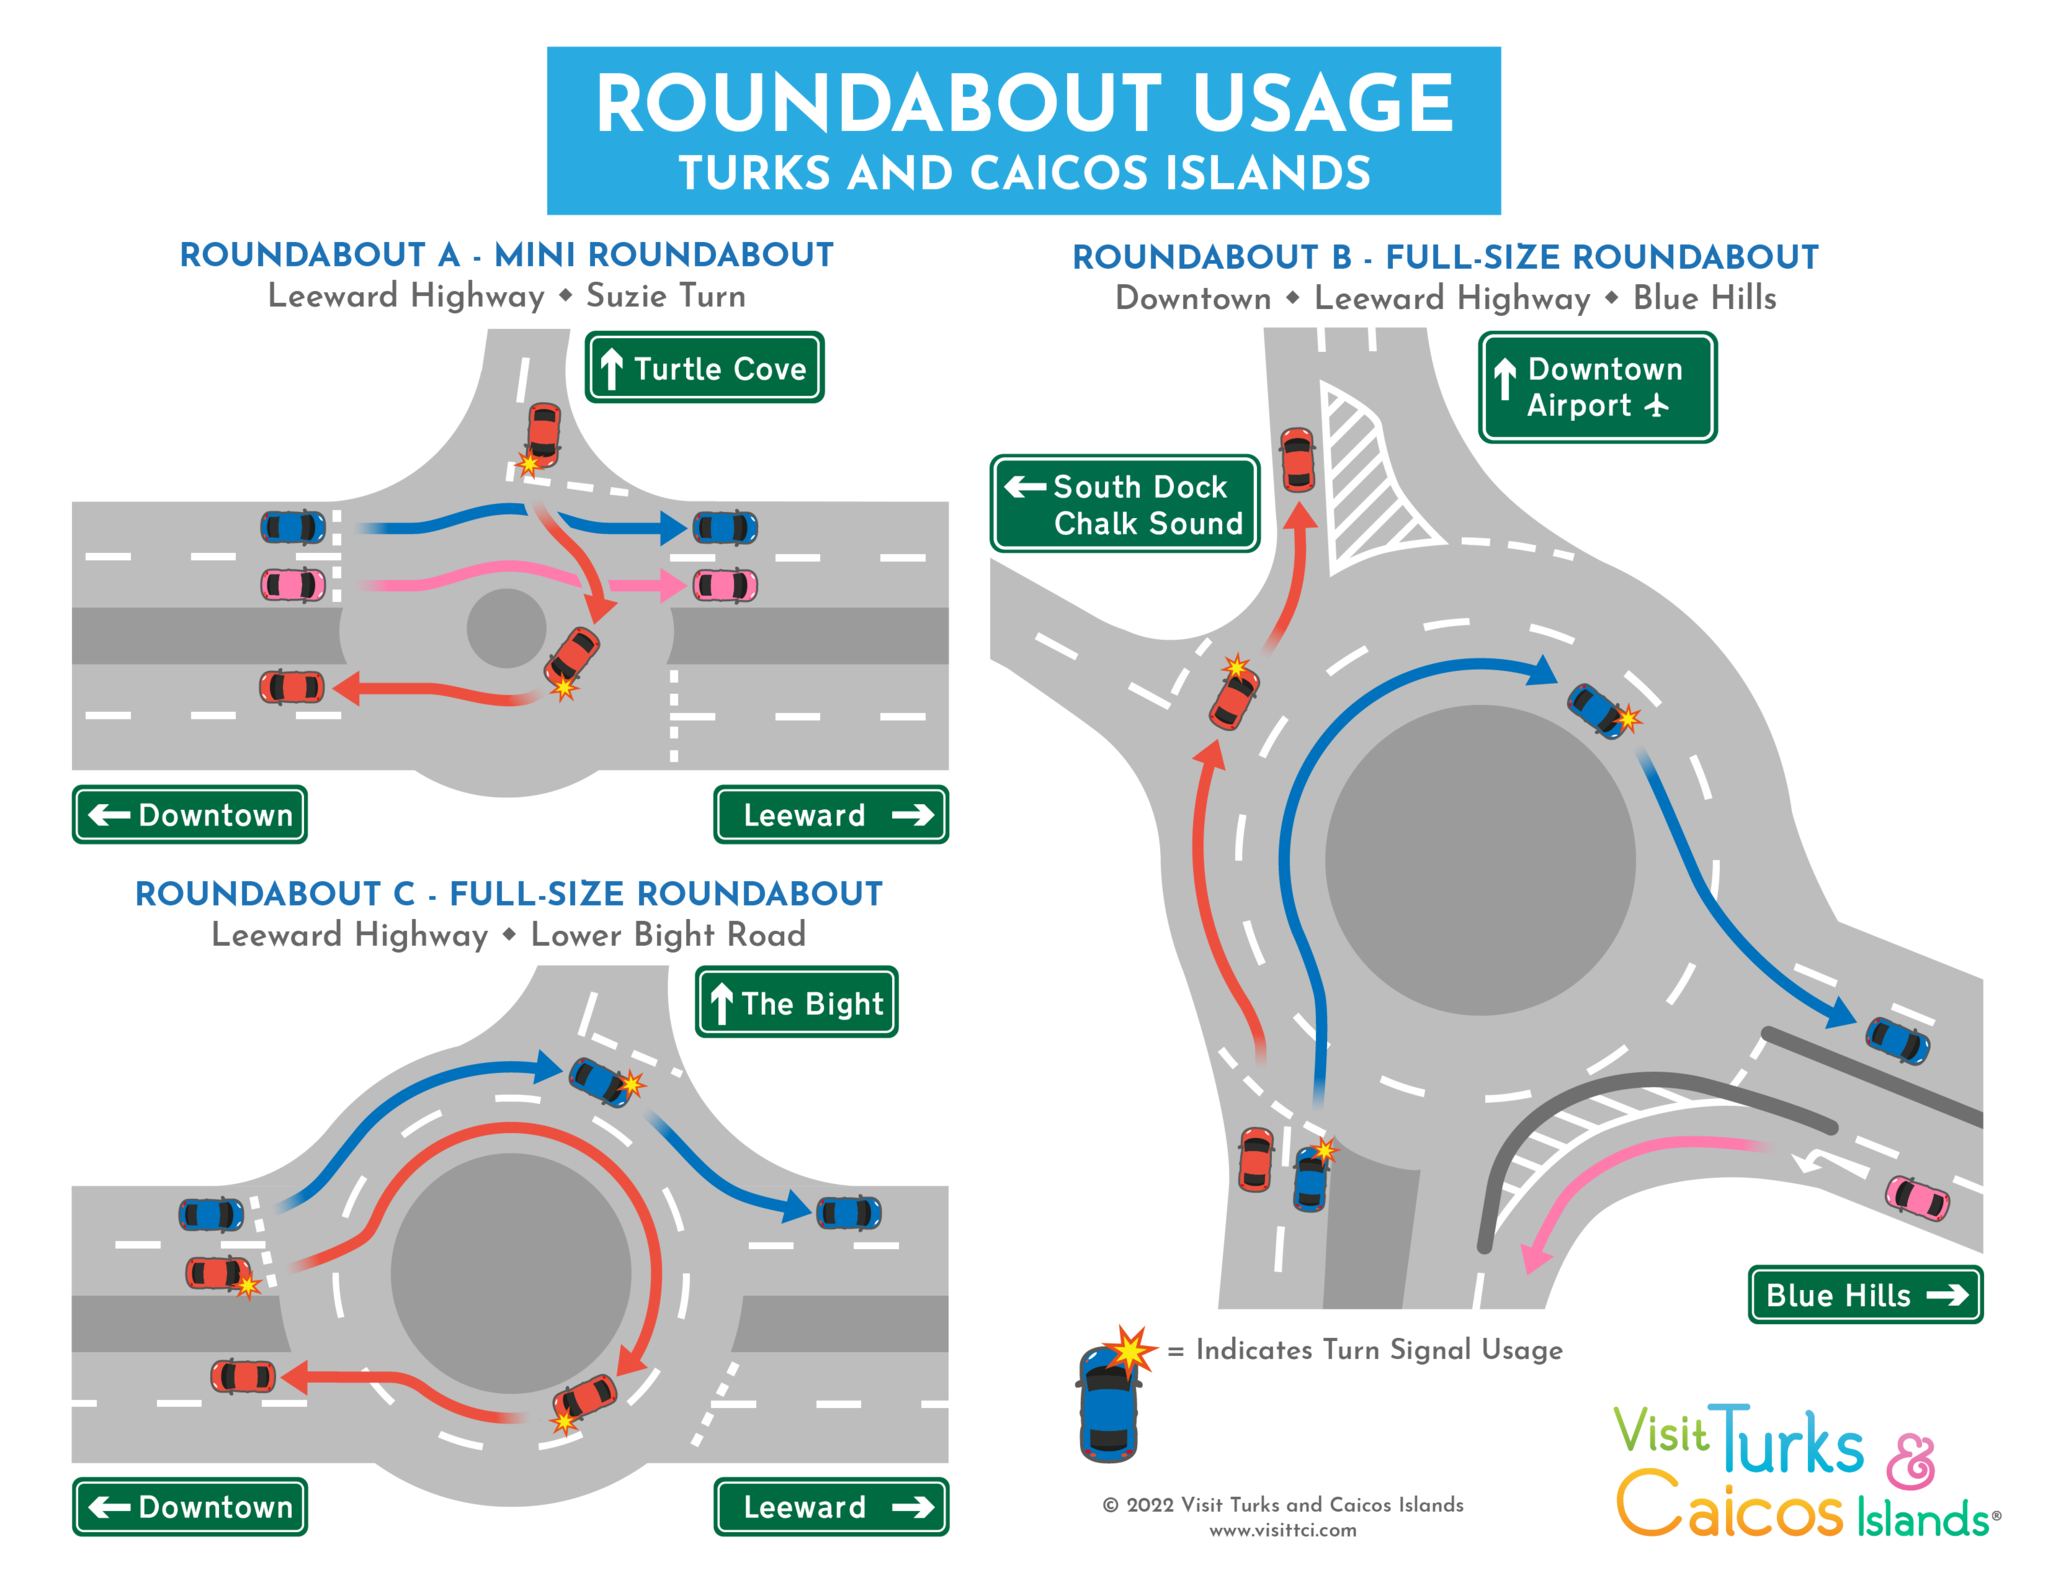 How to use roundabouts in TCI